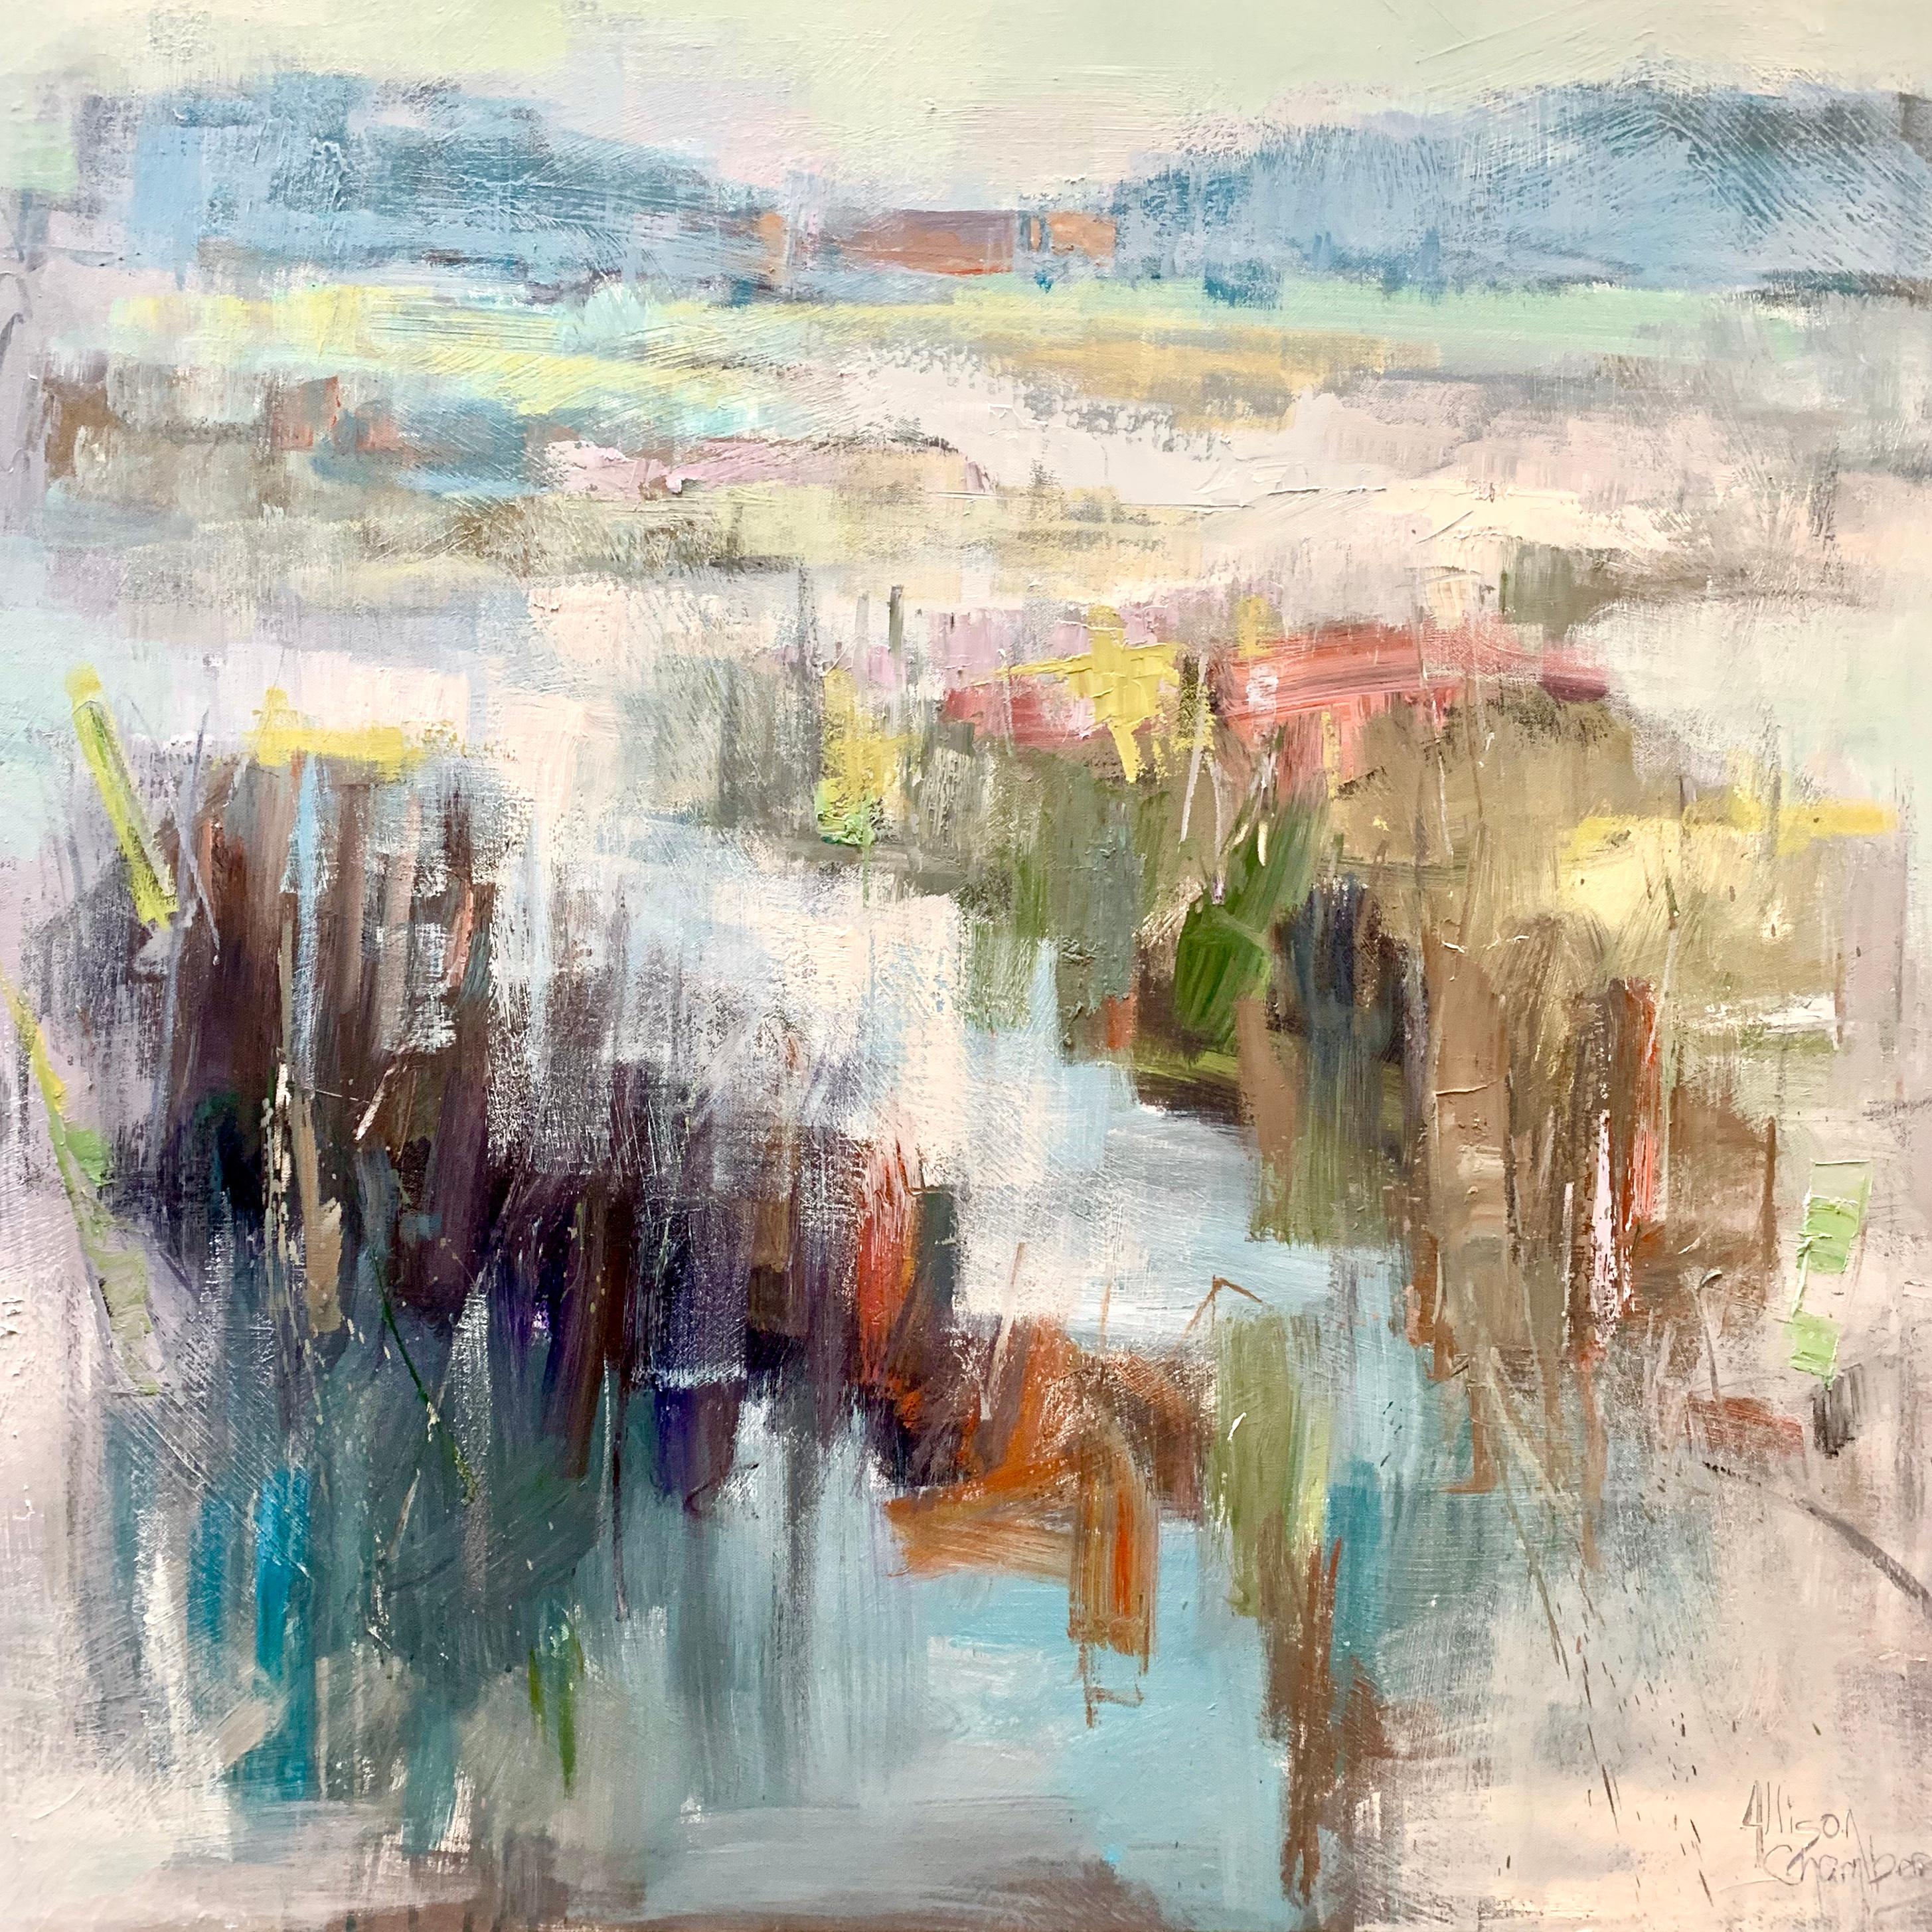 'New Tide' is a large framed Impressionist oil on canvas painting of square format created by American artist Allison Chambers in 2020. Featuring a palette made of white, green, turquoise, purple and brown tones among others, this painting depicts a